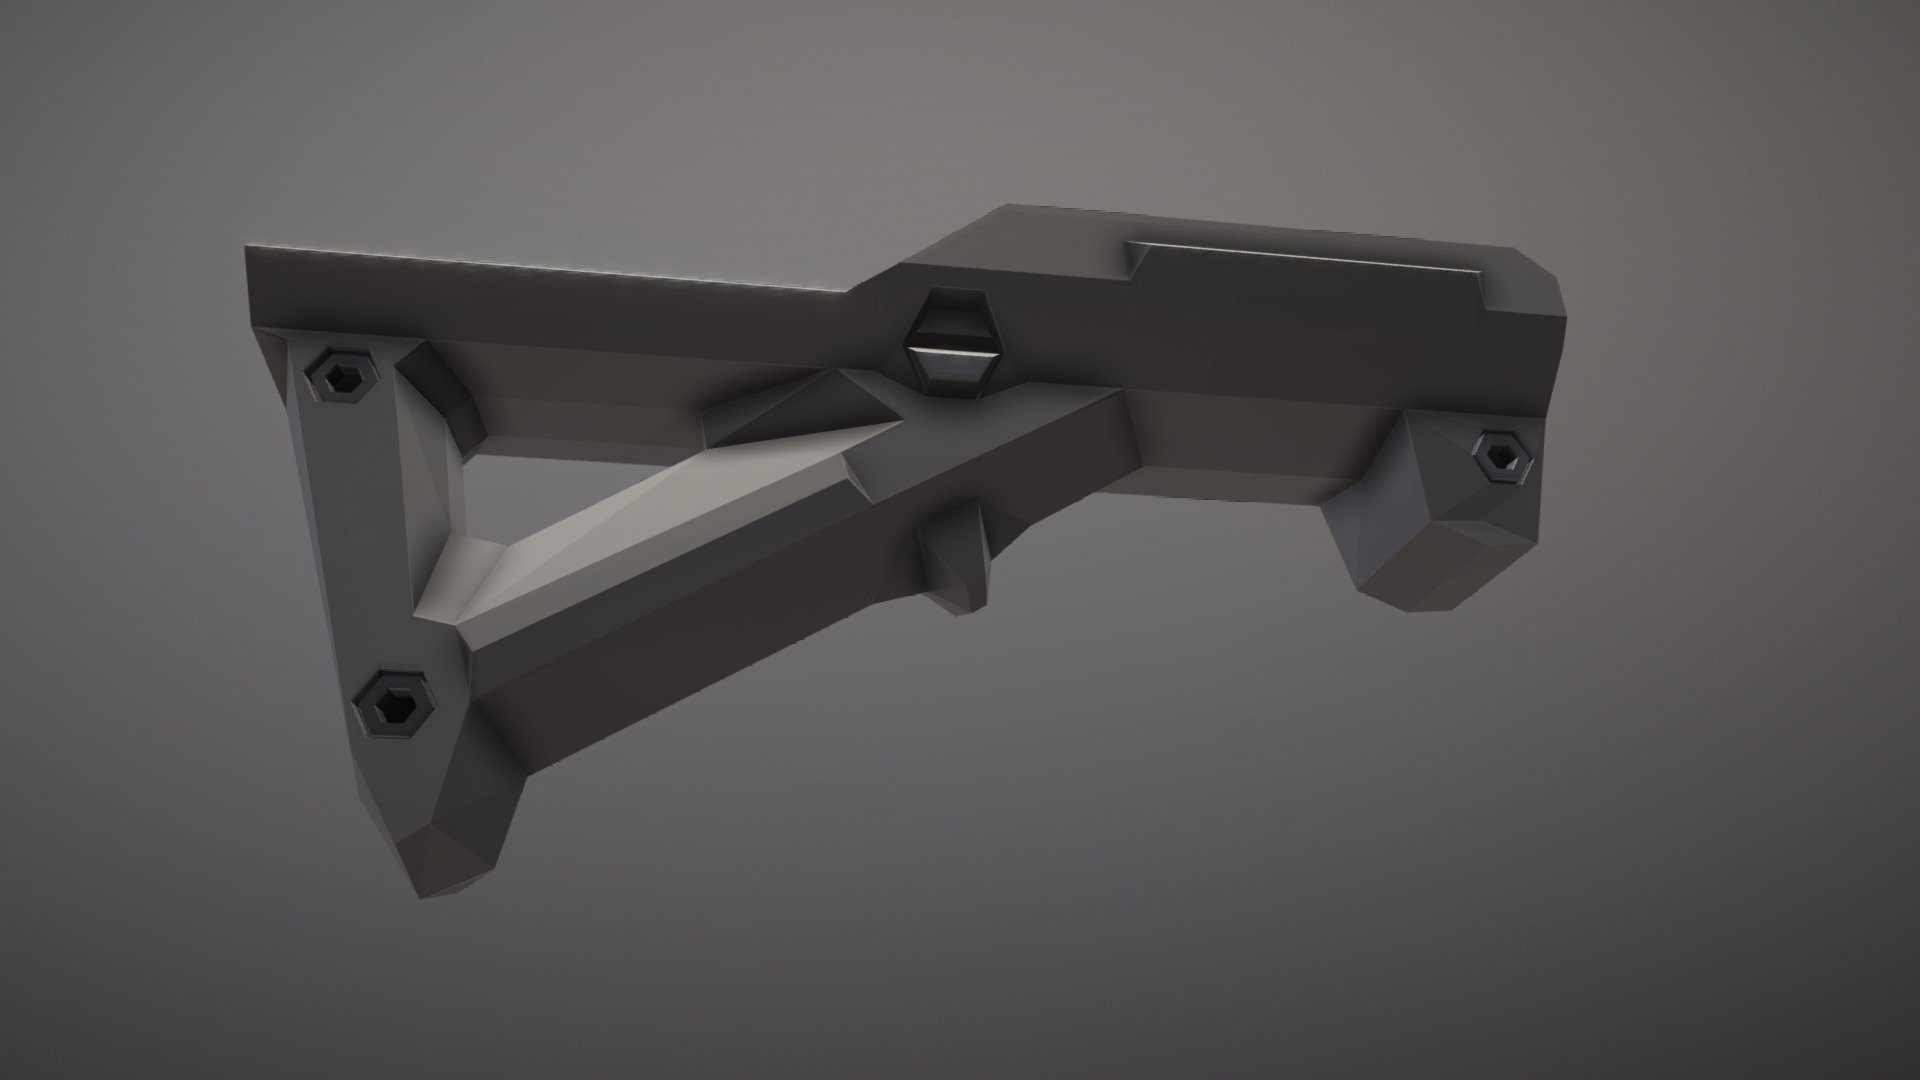 Low-Poly model of the Magpul AFG, which is short for Angled Foregrip because they just want their product names to sound cool and operator apparently 3d model